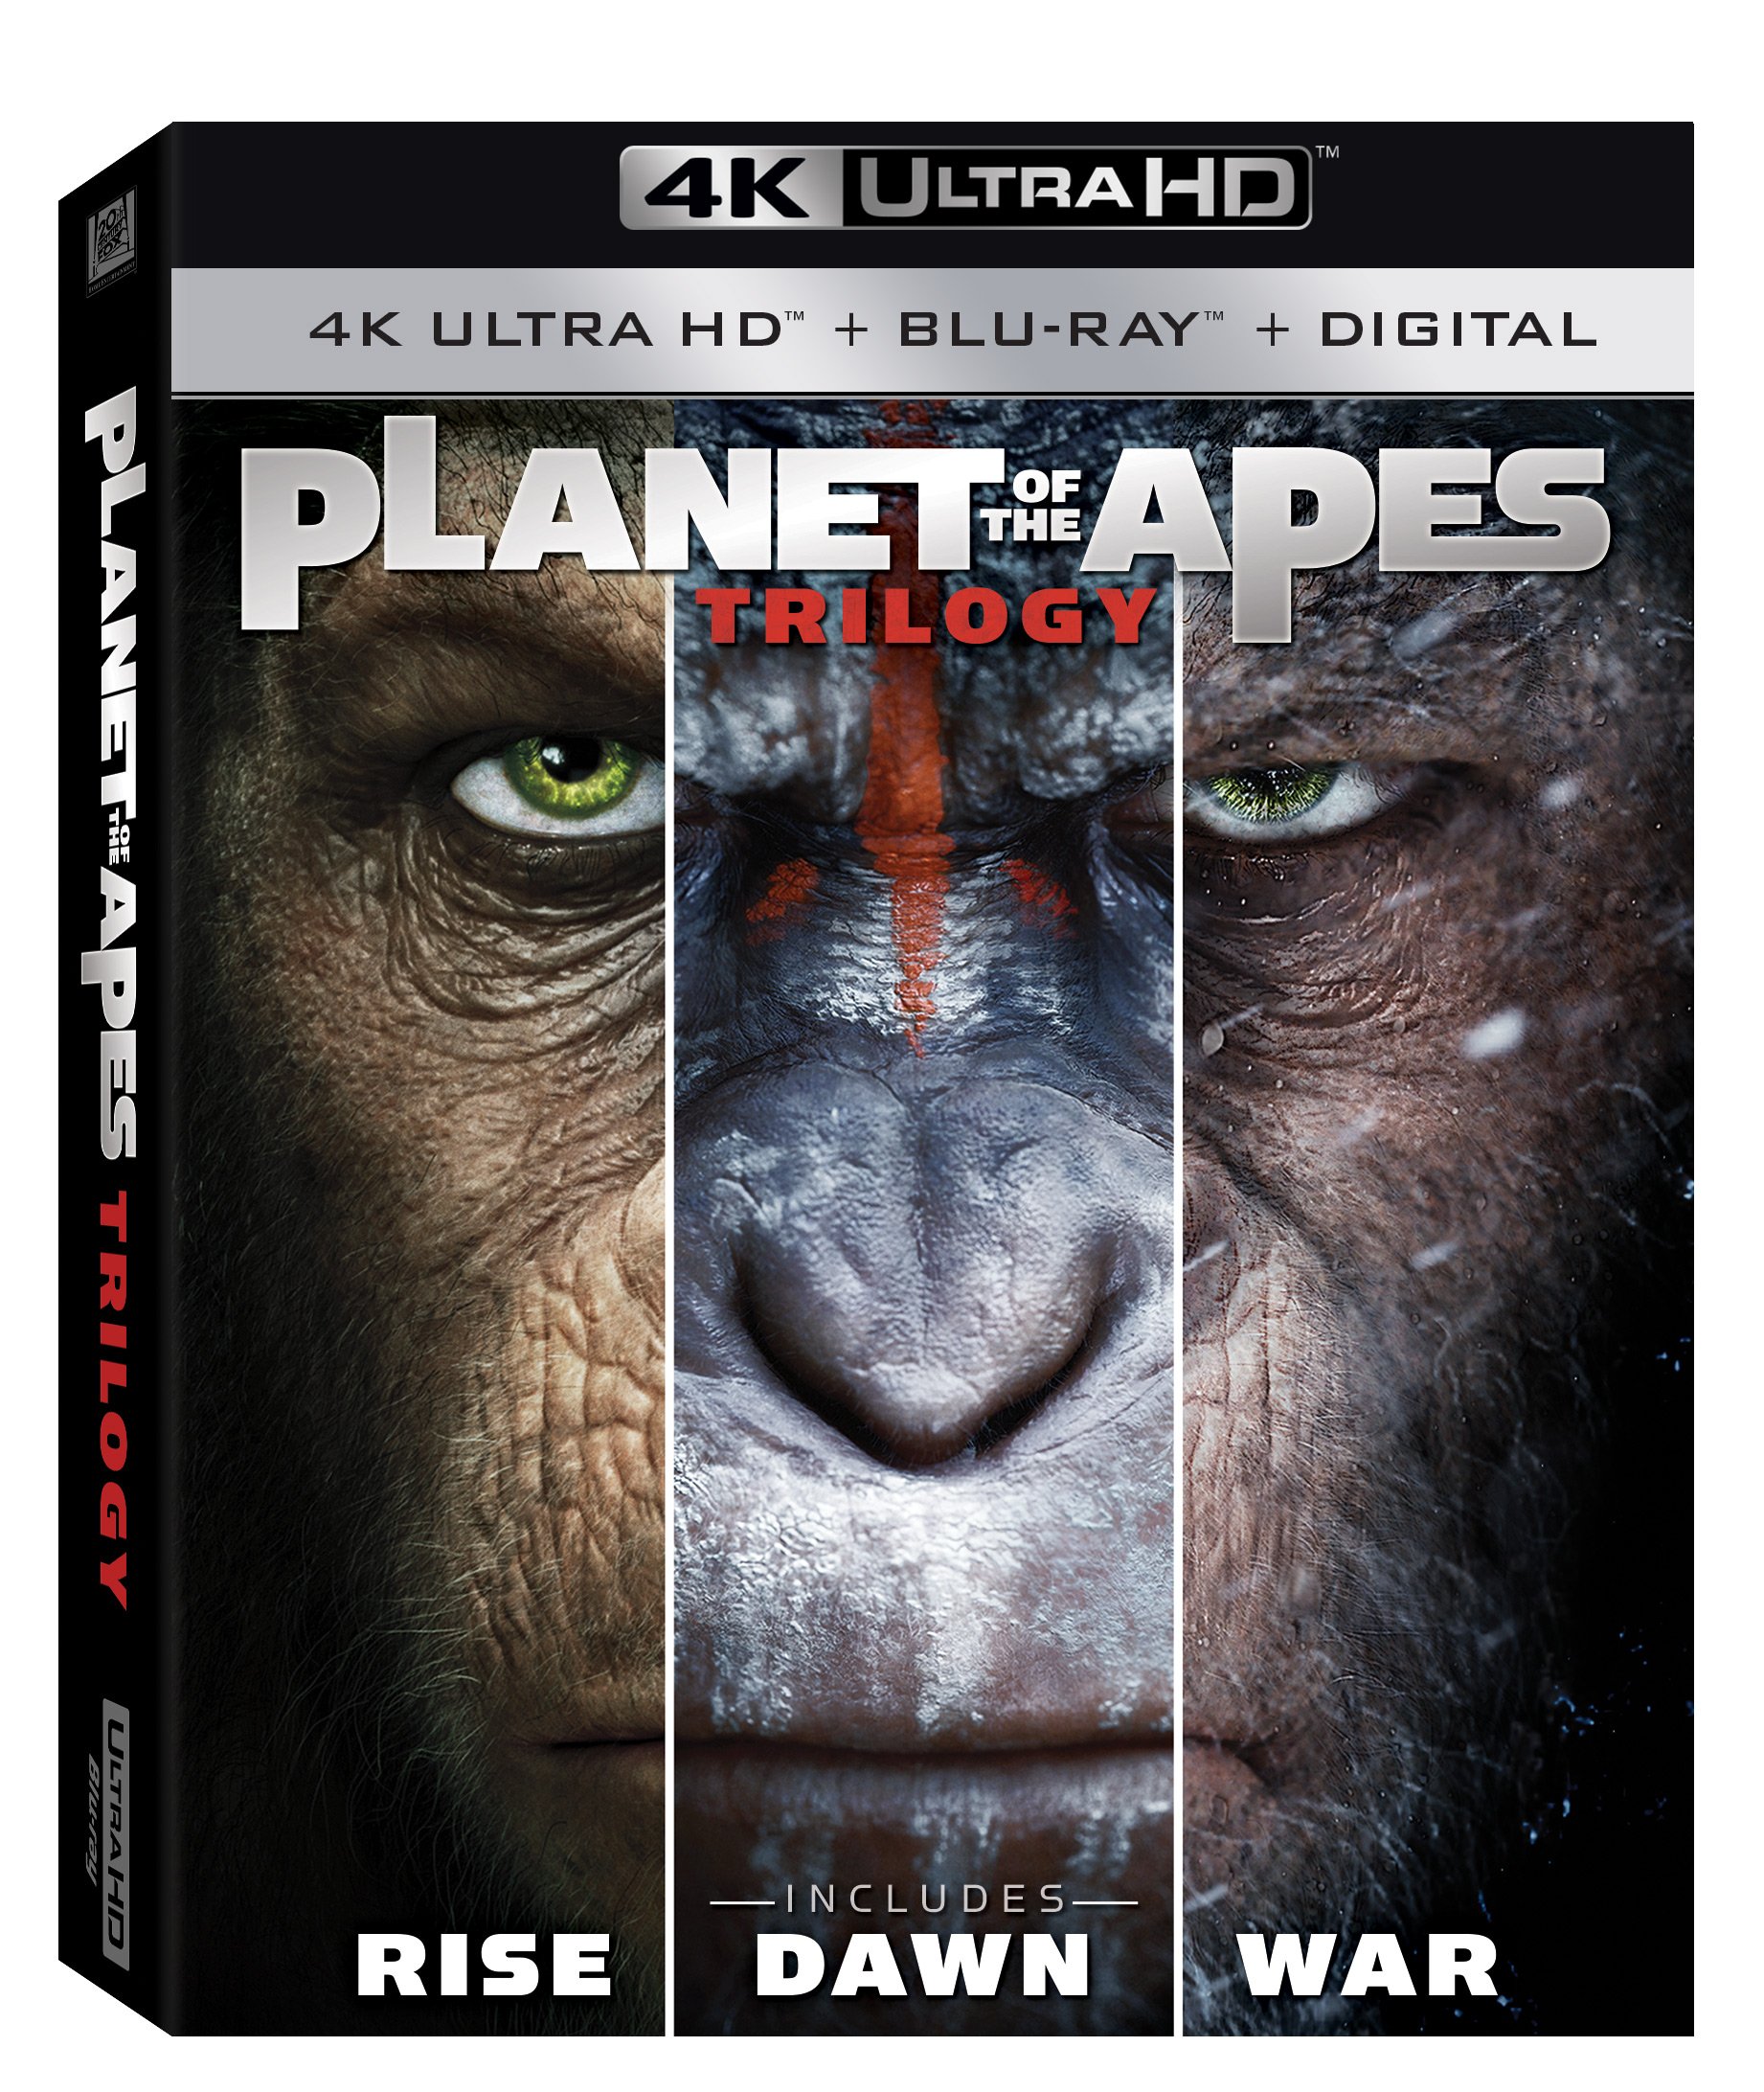 Planet of the Apes 1-3 Trilogy [4K Ultra HD + Blu-Ray + Digital]  $16.99 @ Amazon